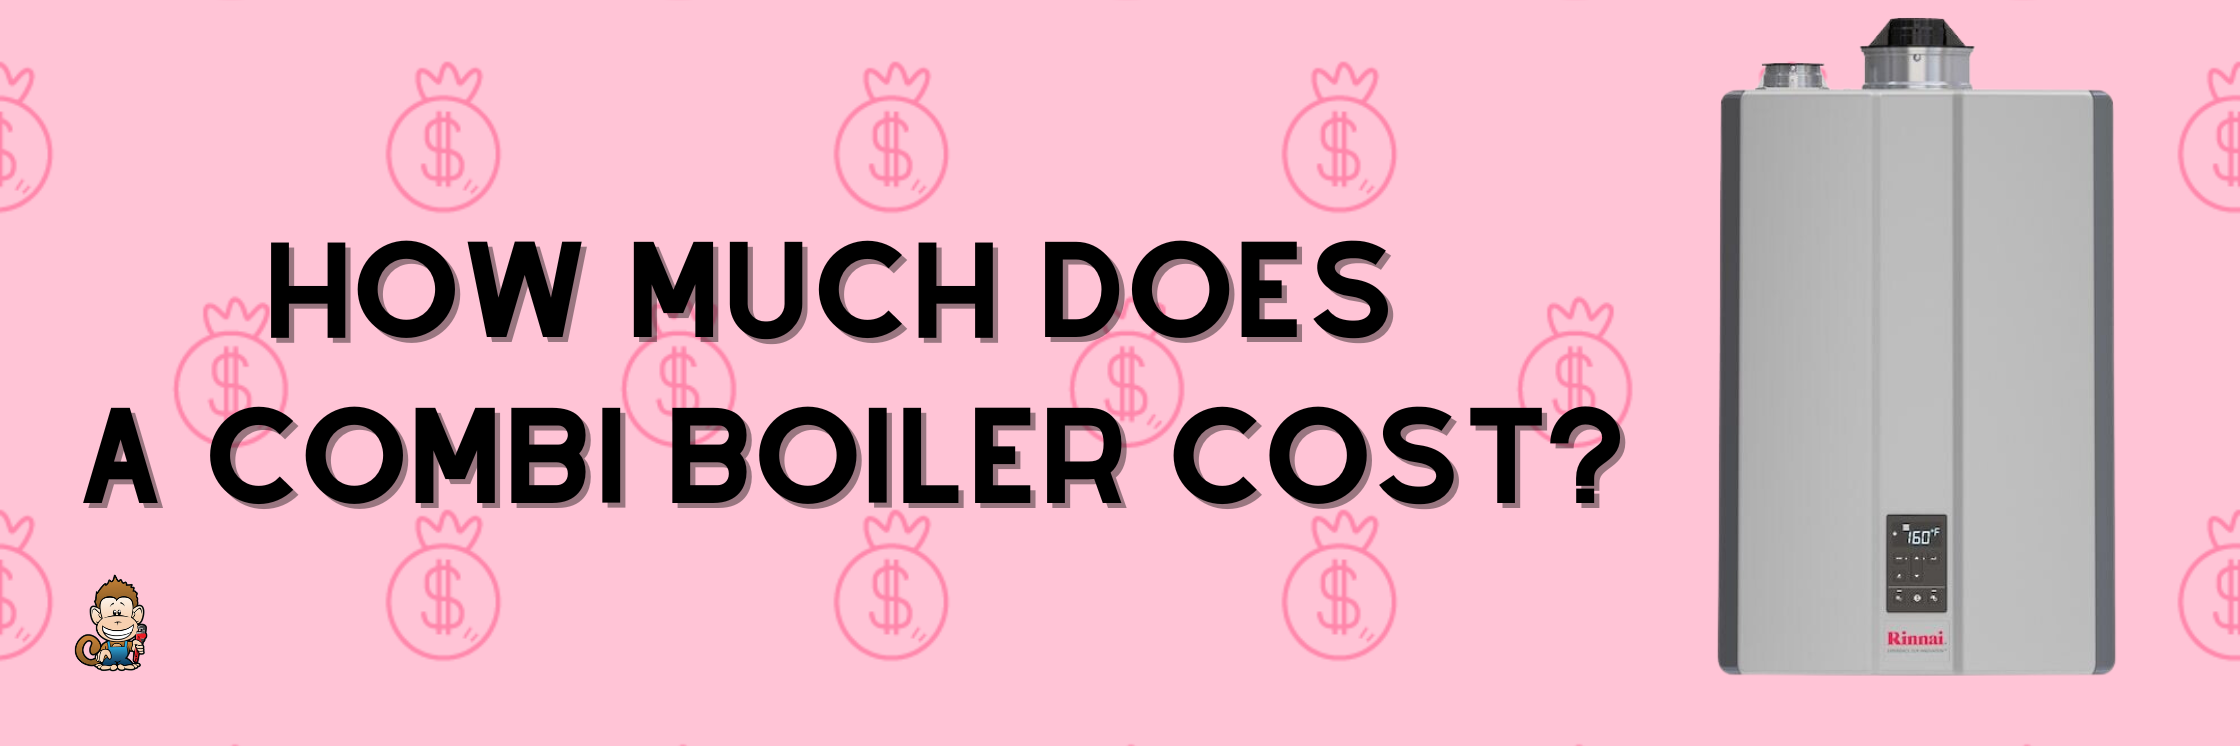 How Much Does a Combi Boiler Cost?